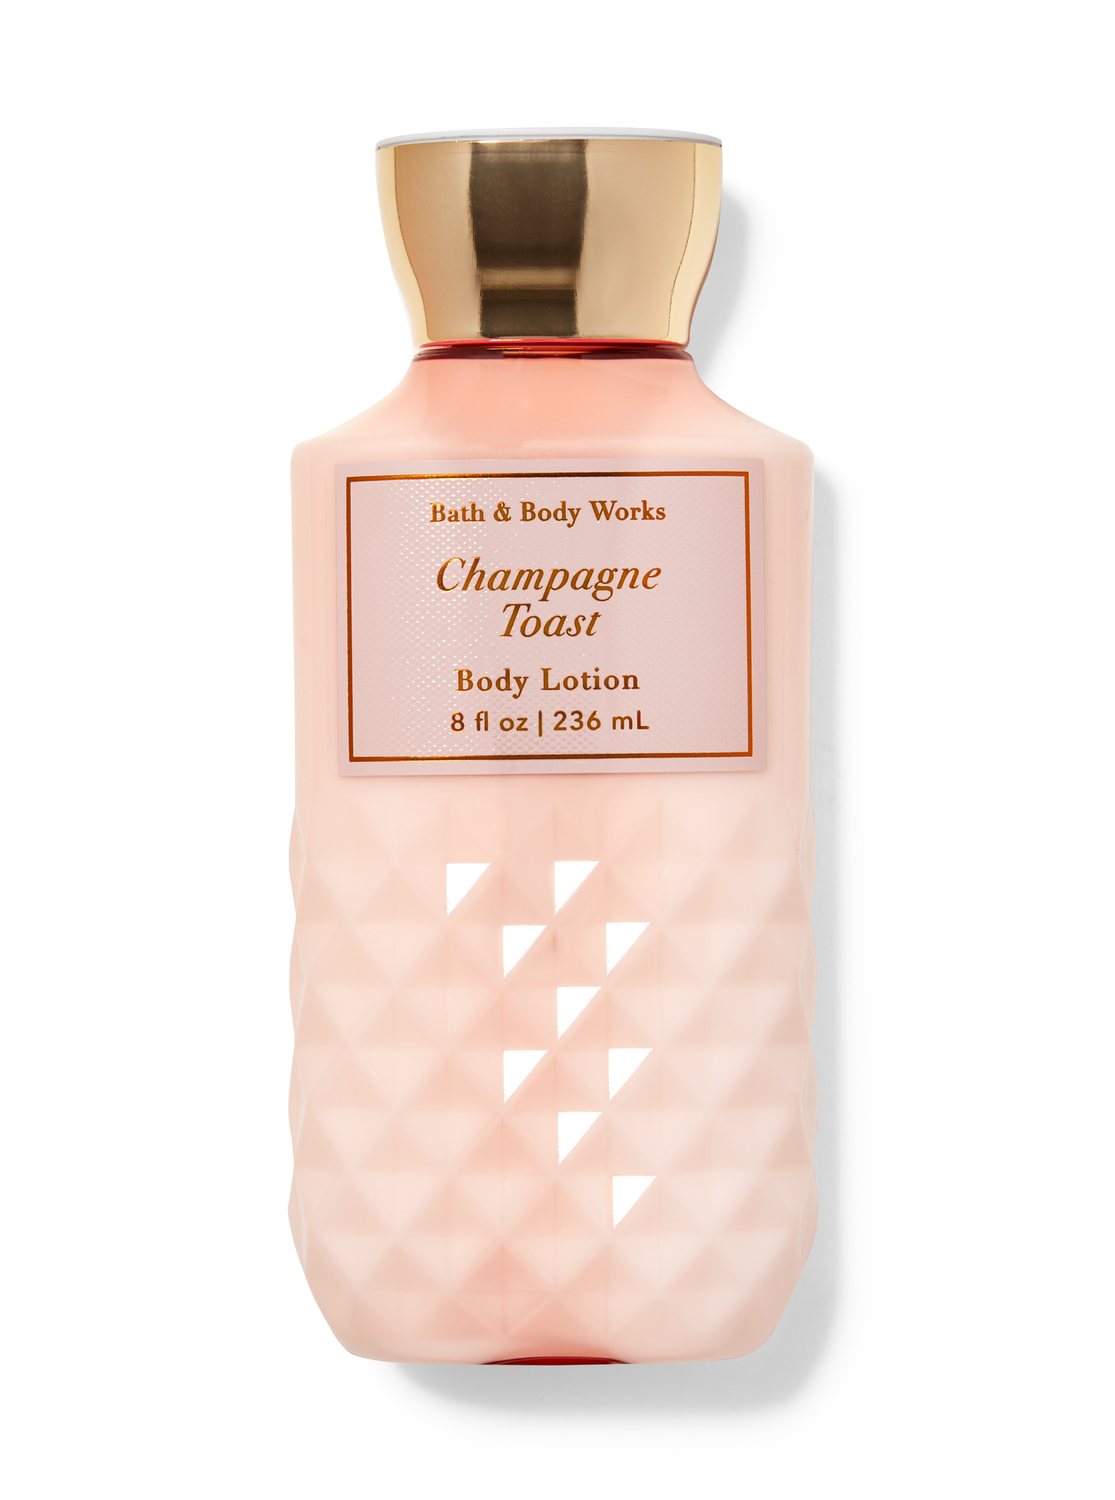 Champagne Toast Body Lotion | Bath & Body Works Australia Official Site